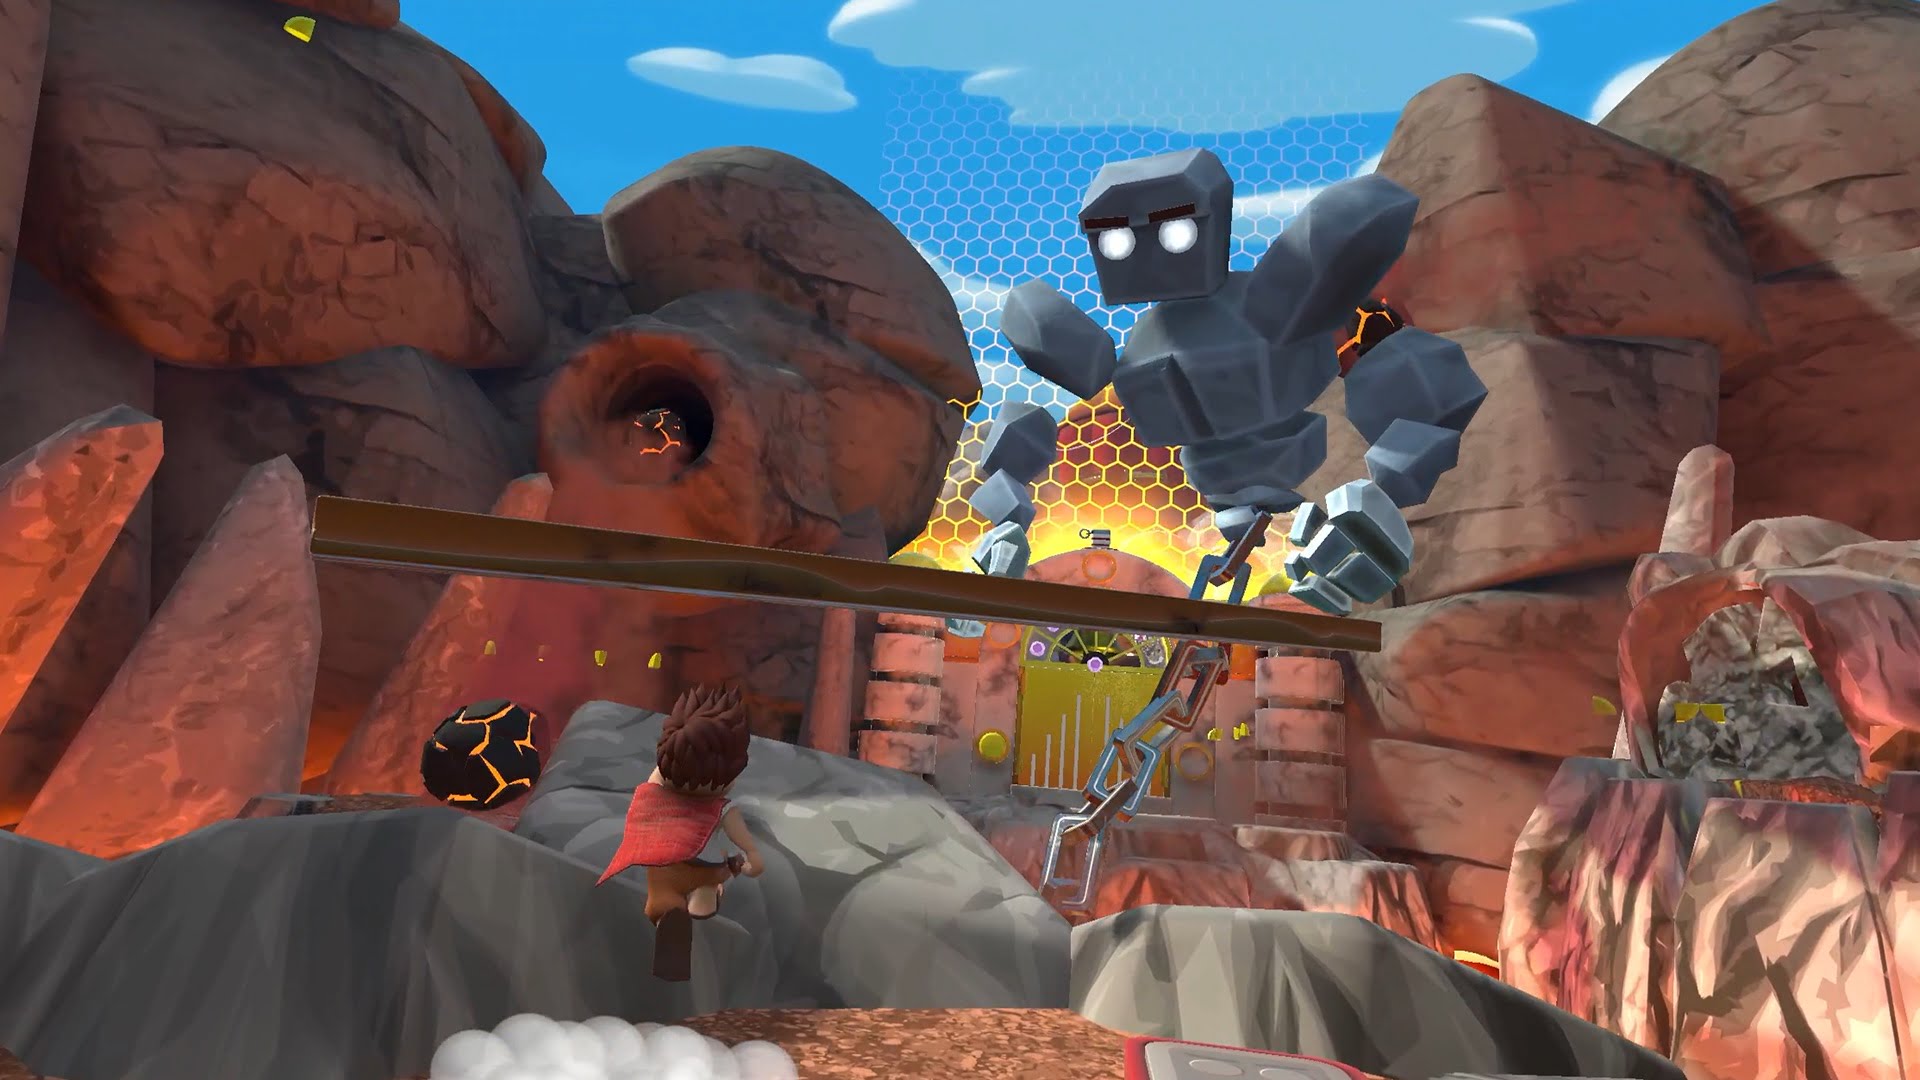 Asymmetric platformer ‘VR Giants’ is coming soon to Steam